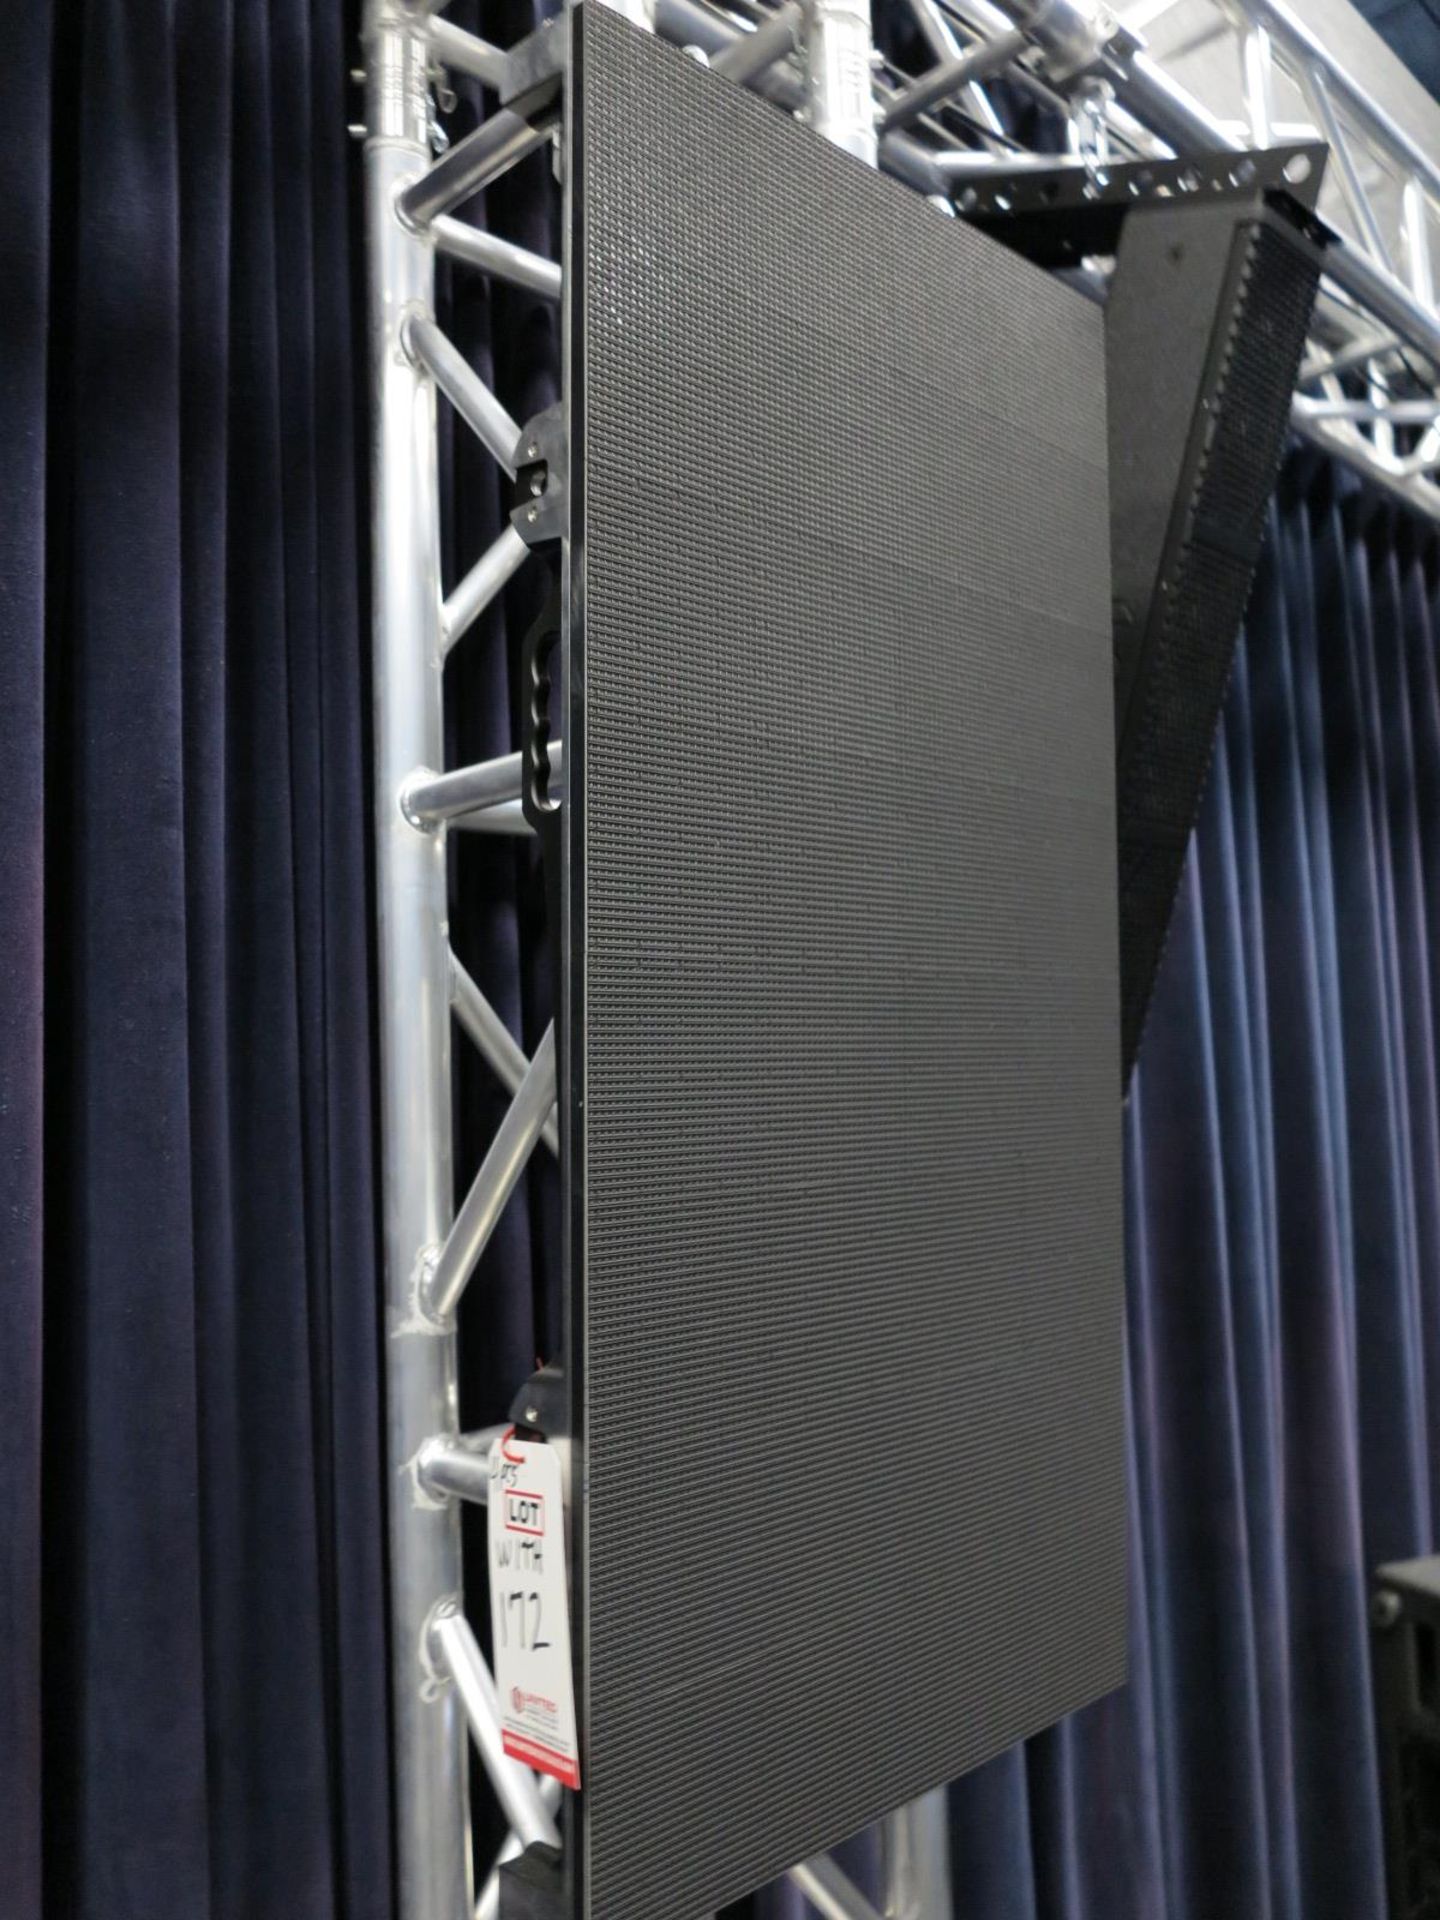 LOT - 10' X 6' LED VIDEO LIGHTBOARD, W/ LED VIDEO PROCESSOR CONTROLLER AND (4) 40" X 20" LED - Image 2 of 4